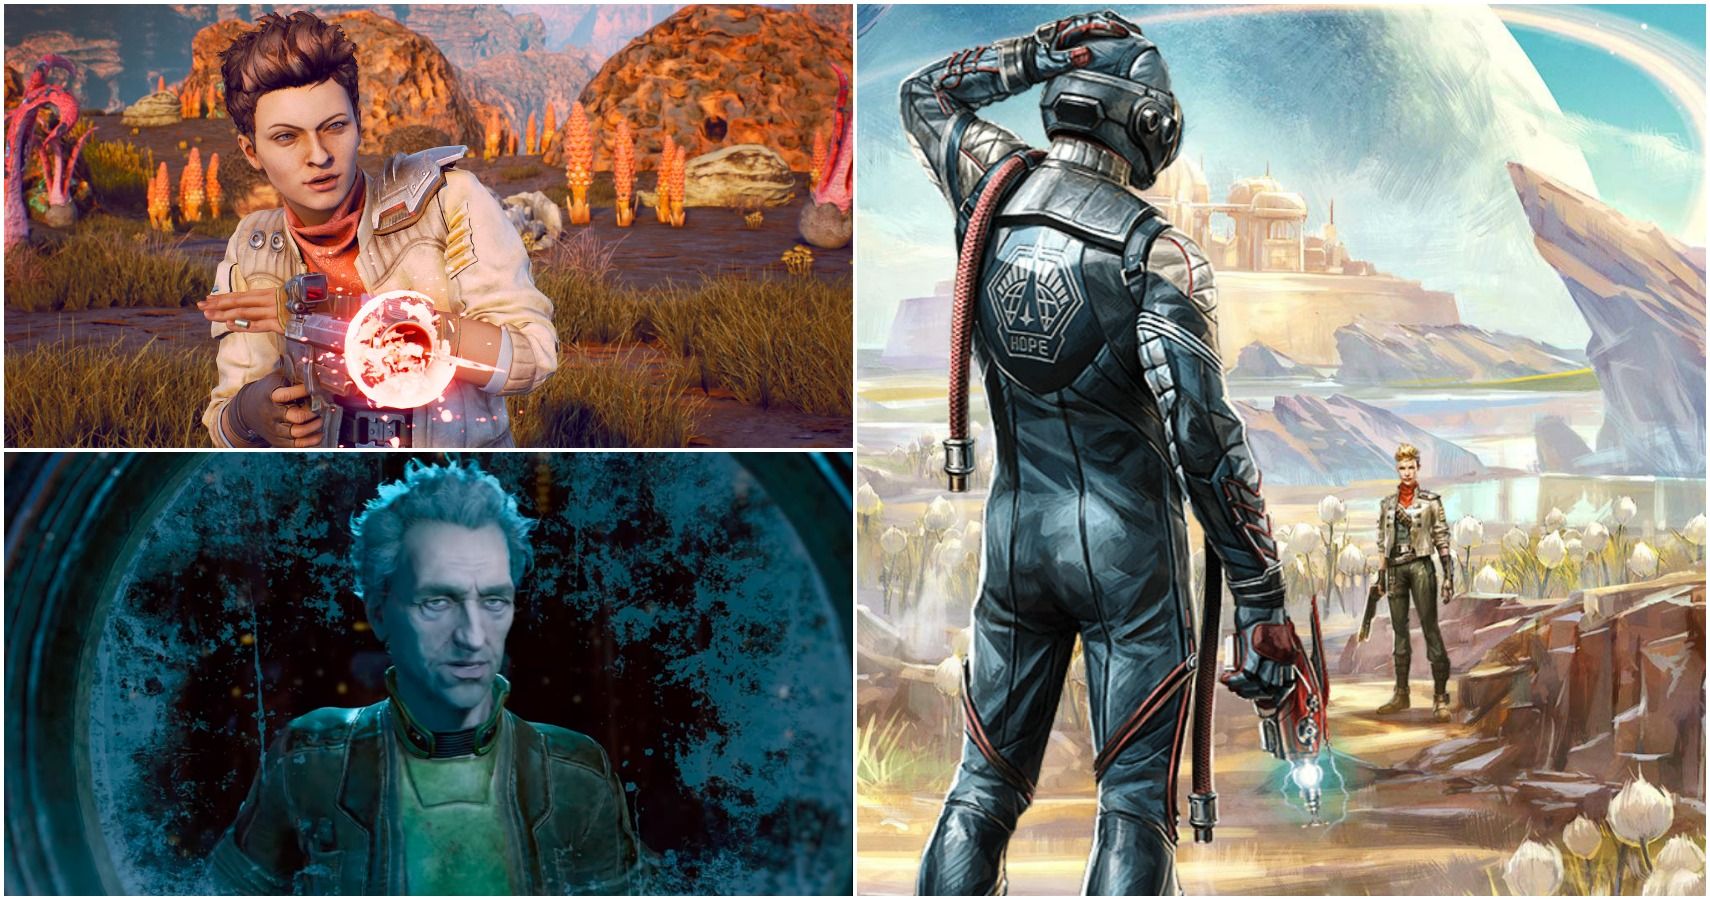 Obsidian is happy to talk about Fallout's influences on The Outer Worlds